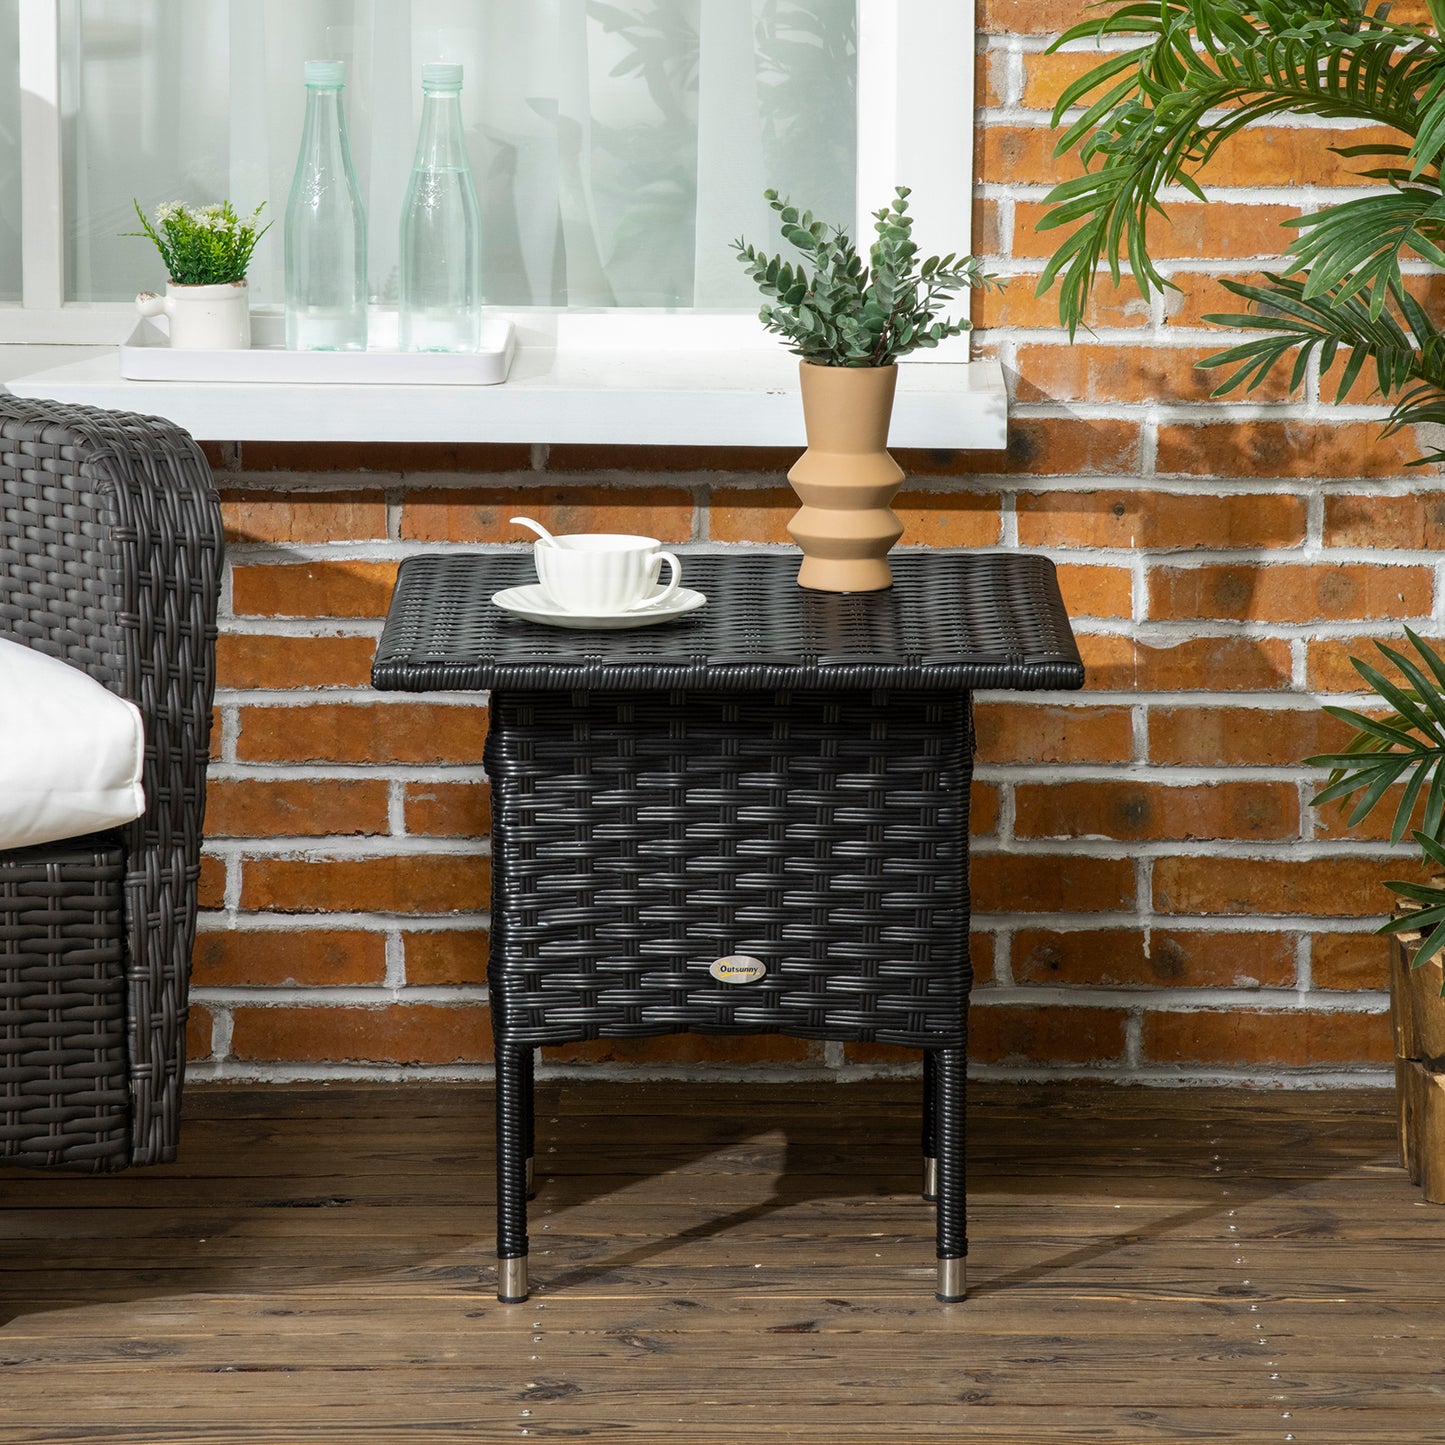 Outsunny Rattan Side Table, Weather-Resistant Outdoor Coffee Table with Durable Plastic Board, Full Woven Top for Garden, Balcony, Black